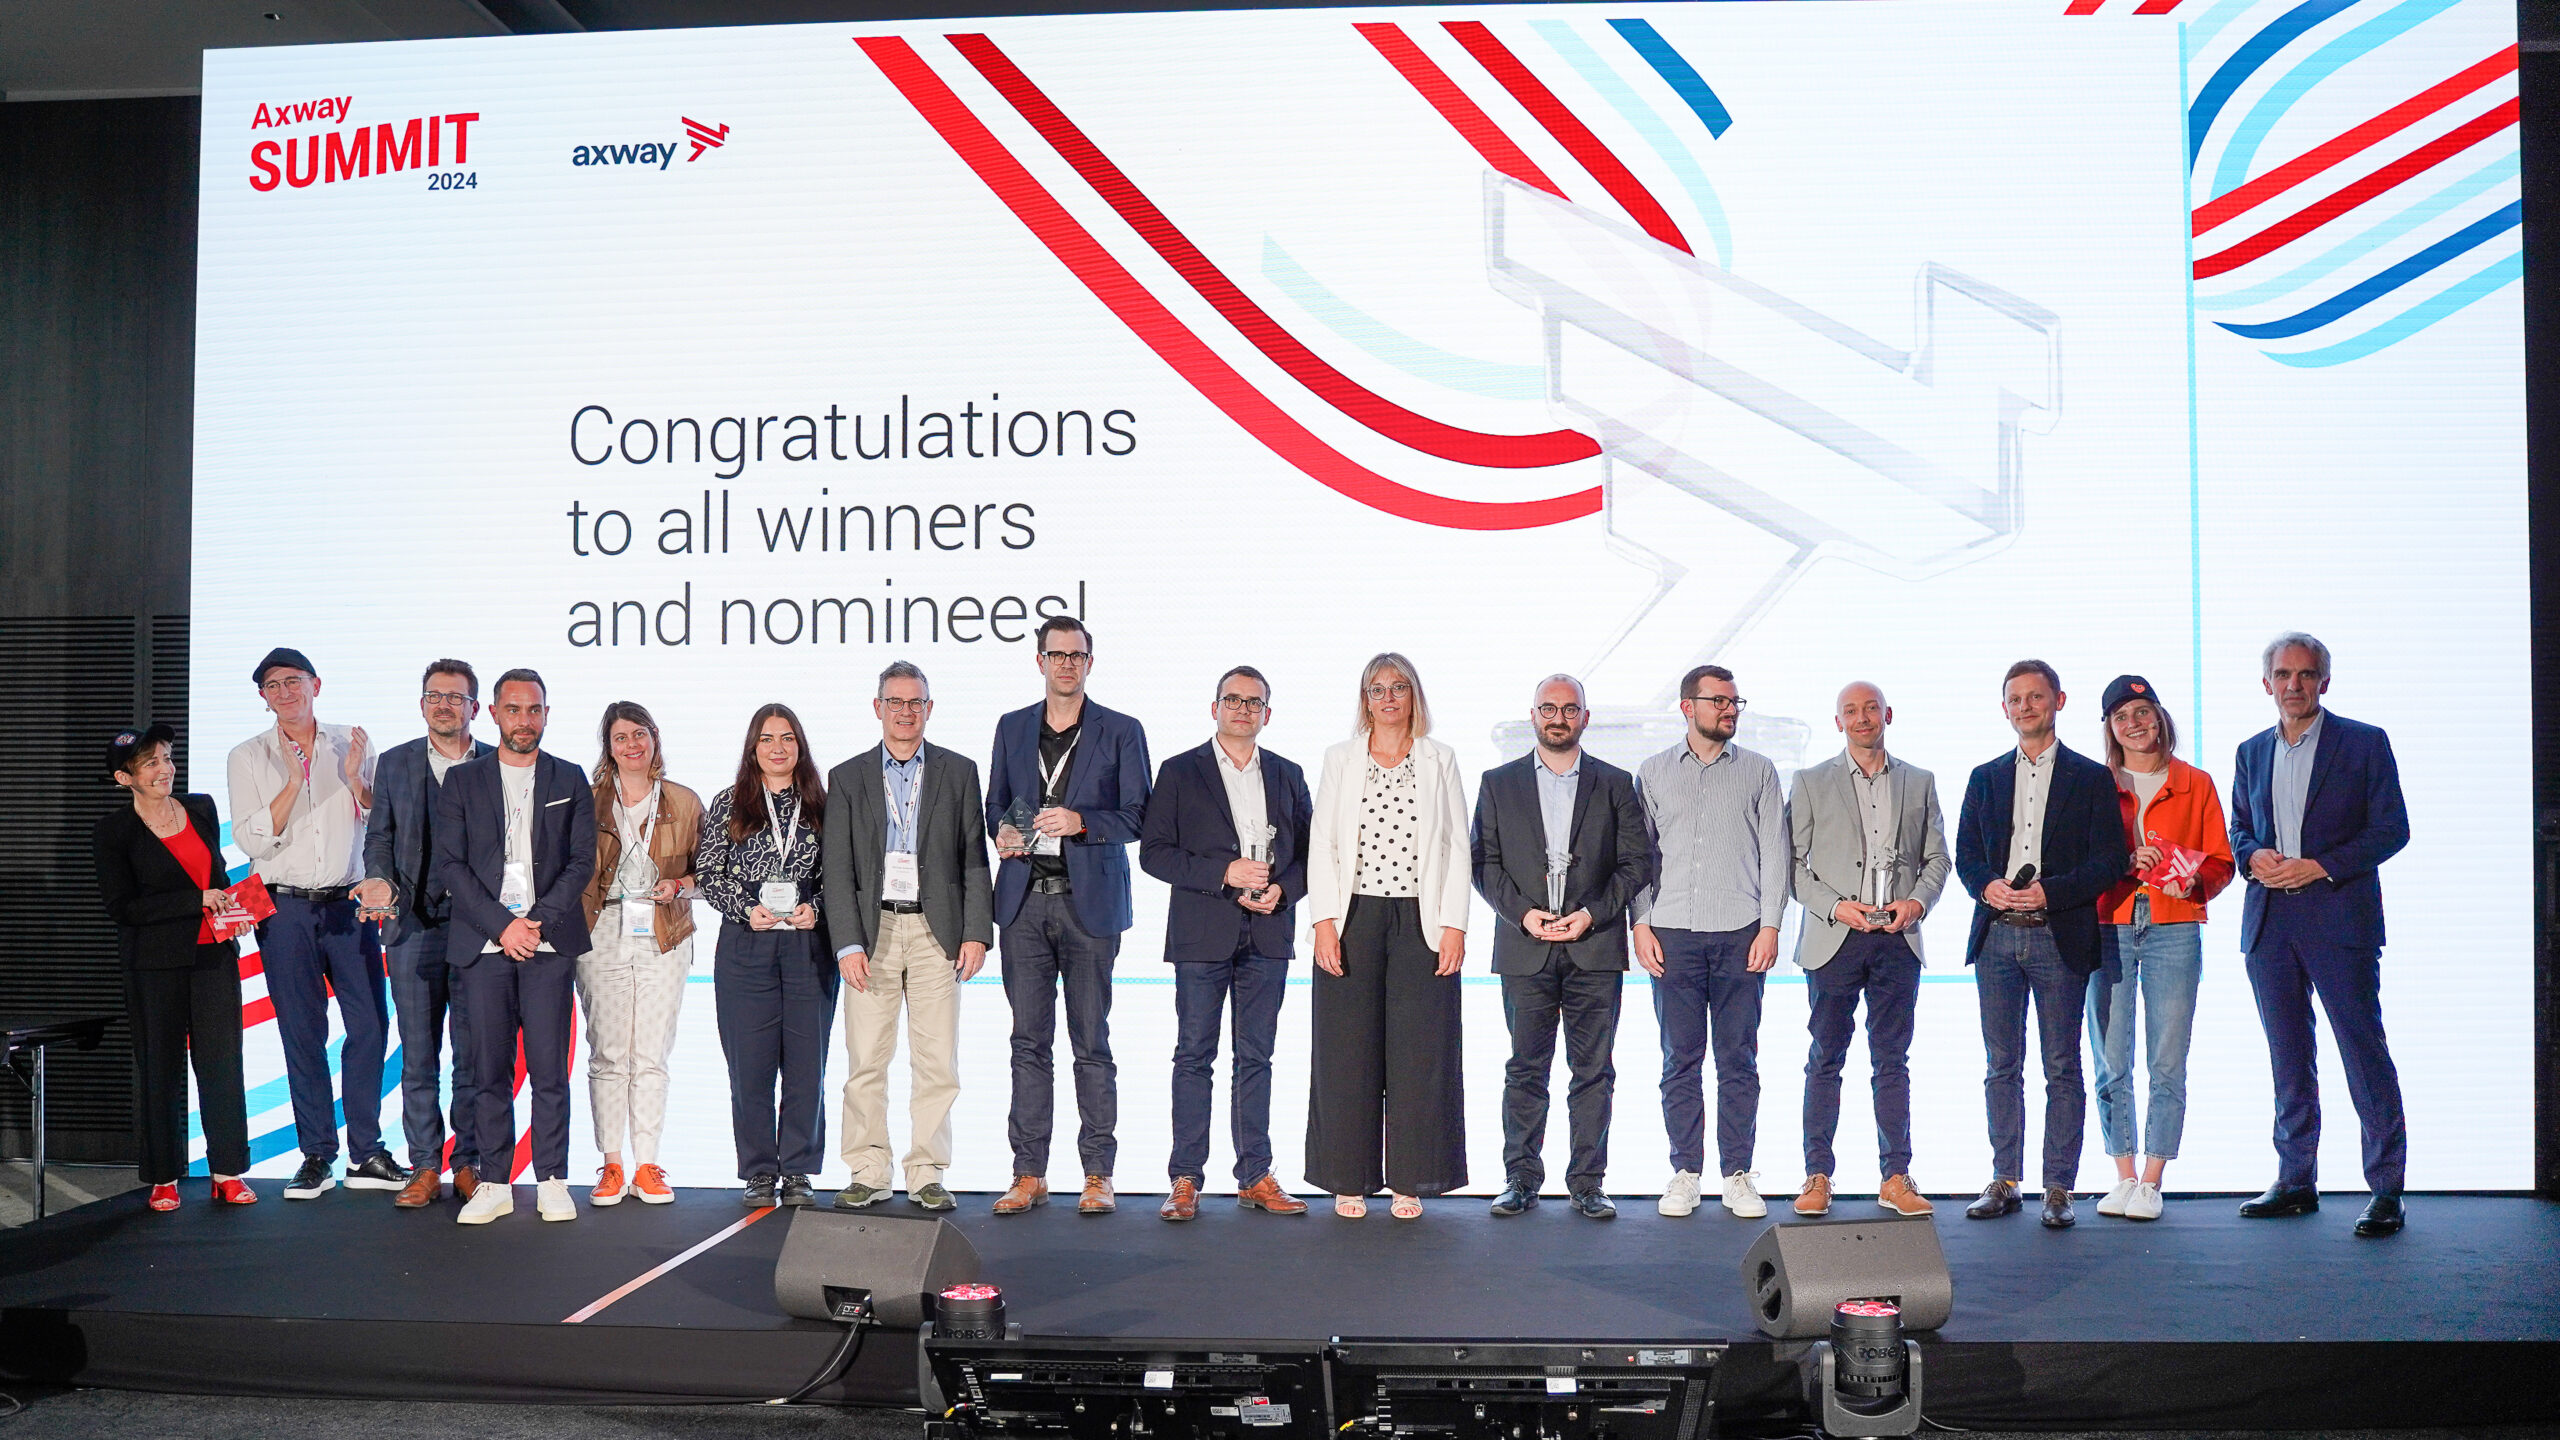 All the EMEA winners of the Axway Excellence Awards on stage at Axway Summit 2024 in Lyon, France